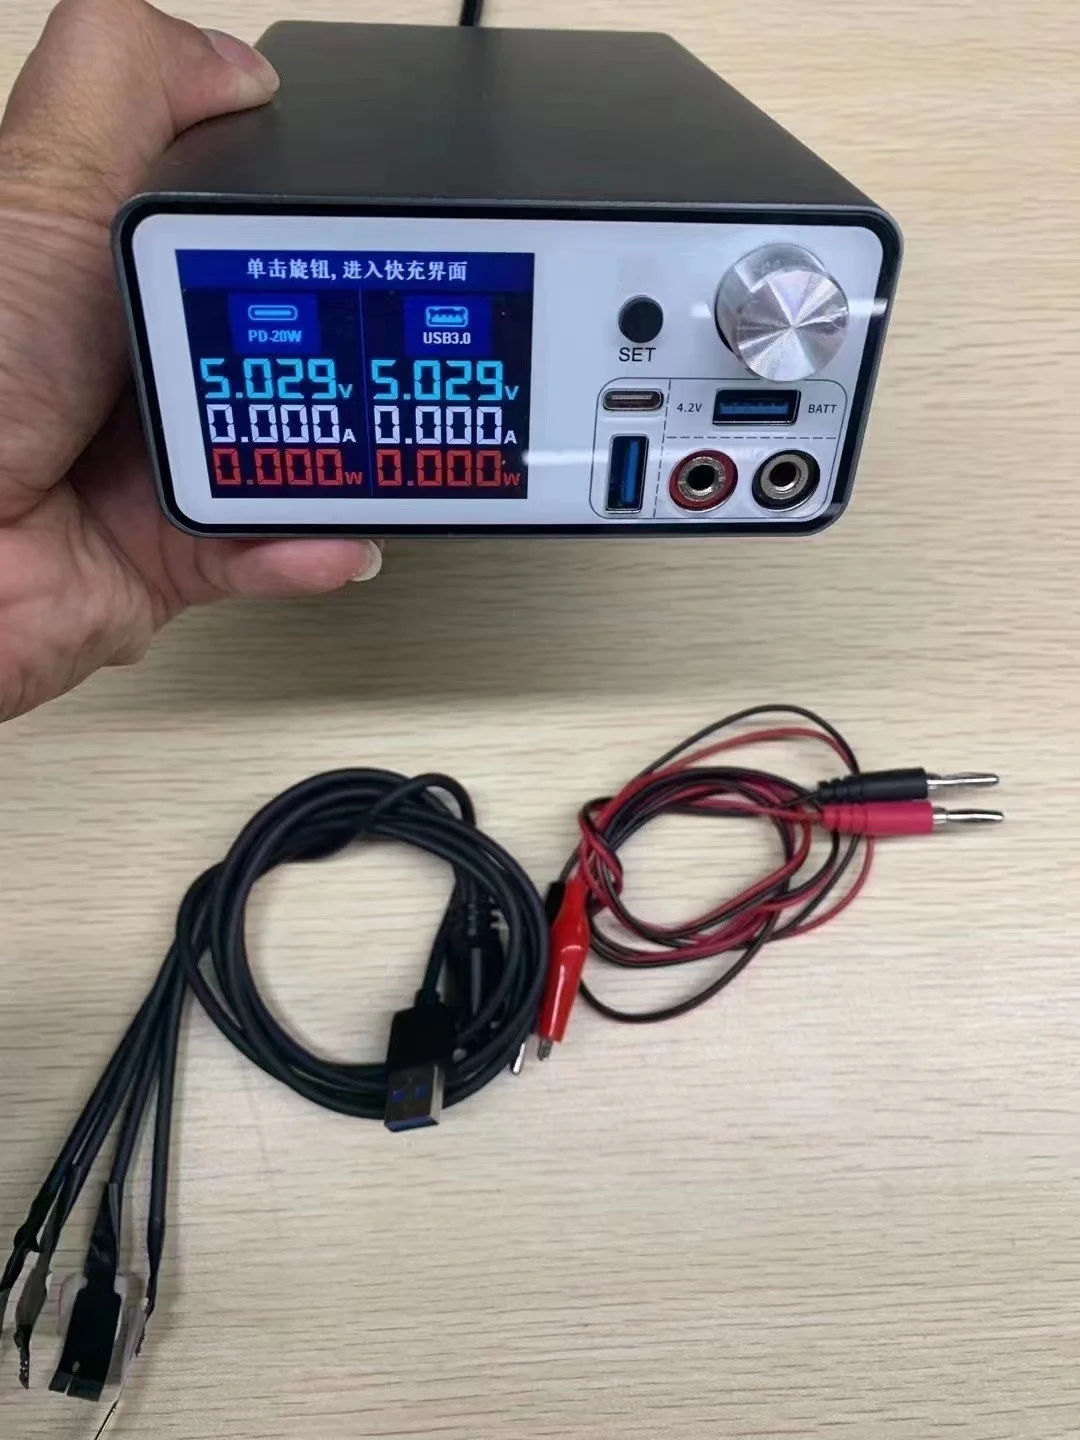 New` P2408 Intelligent Stabilized Power Supply With Adjustable Voltage And Current/Powerful New Updating Version enlarge